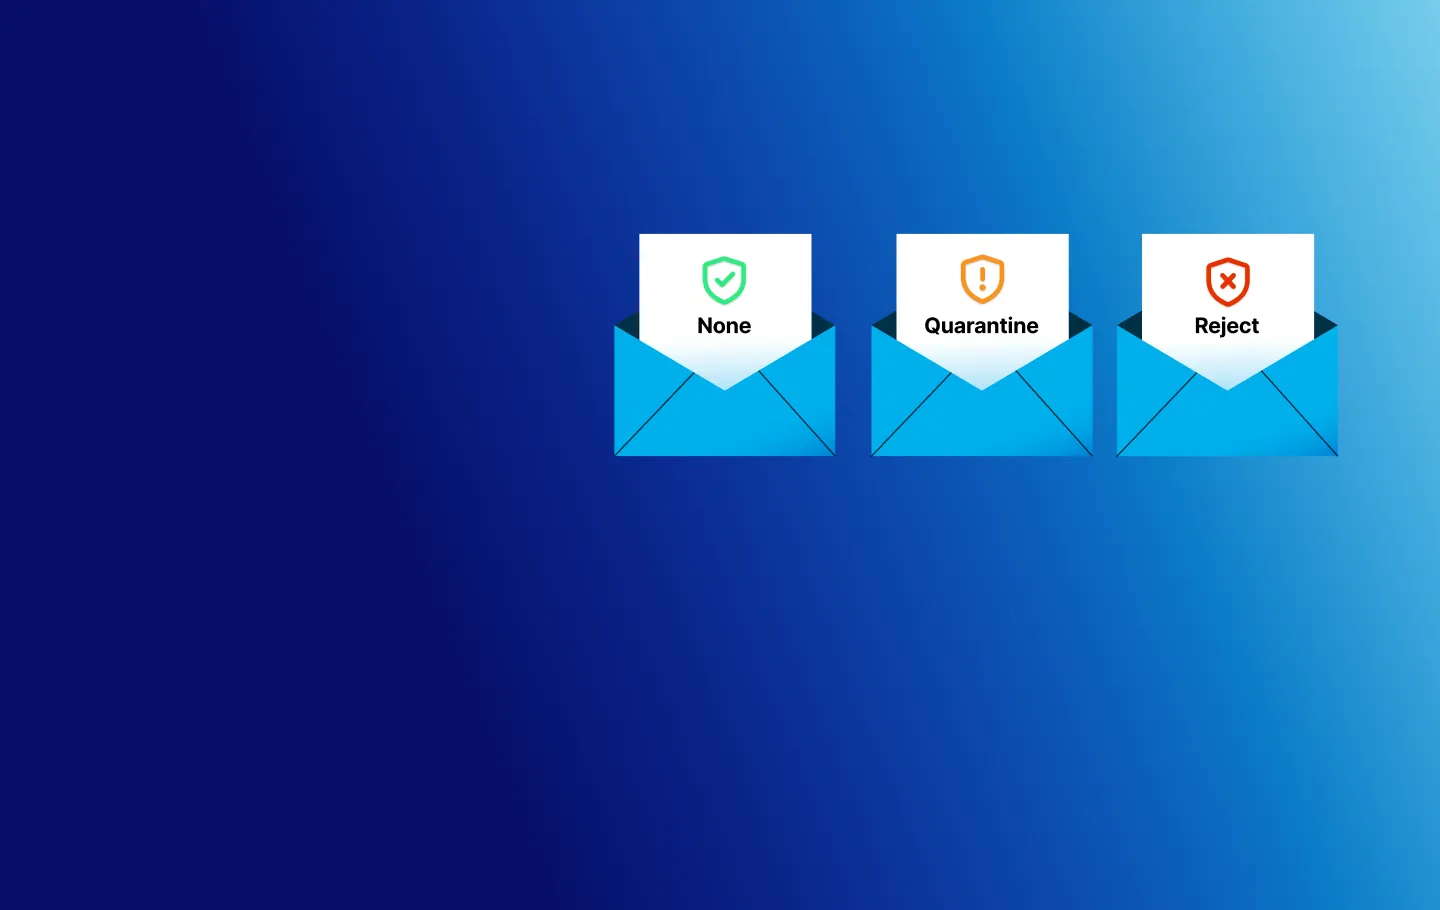 Non, Quorntine and Reject written on the letters on email envelops on a blue background